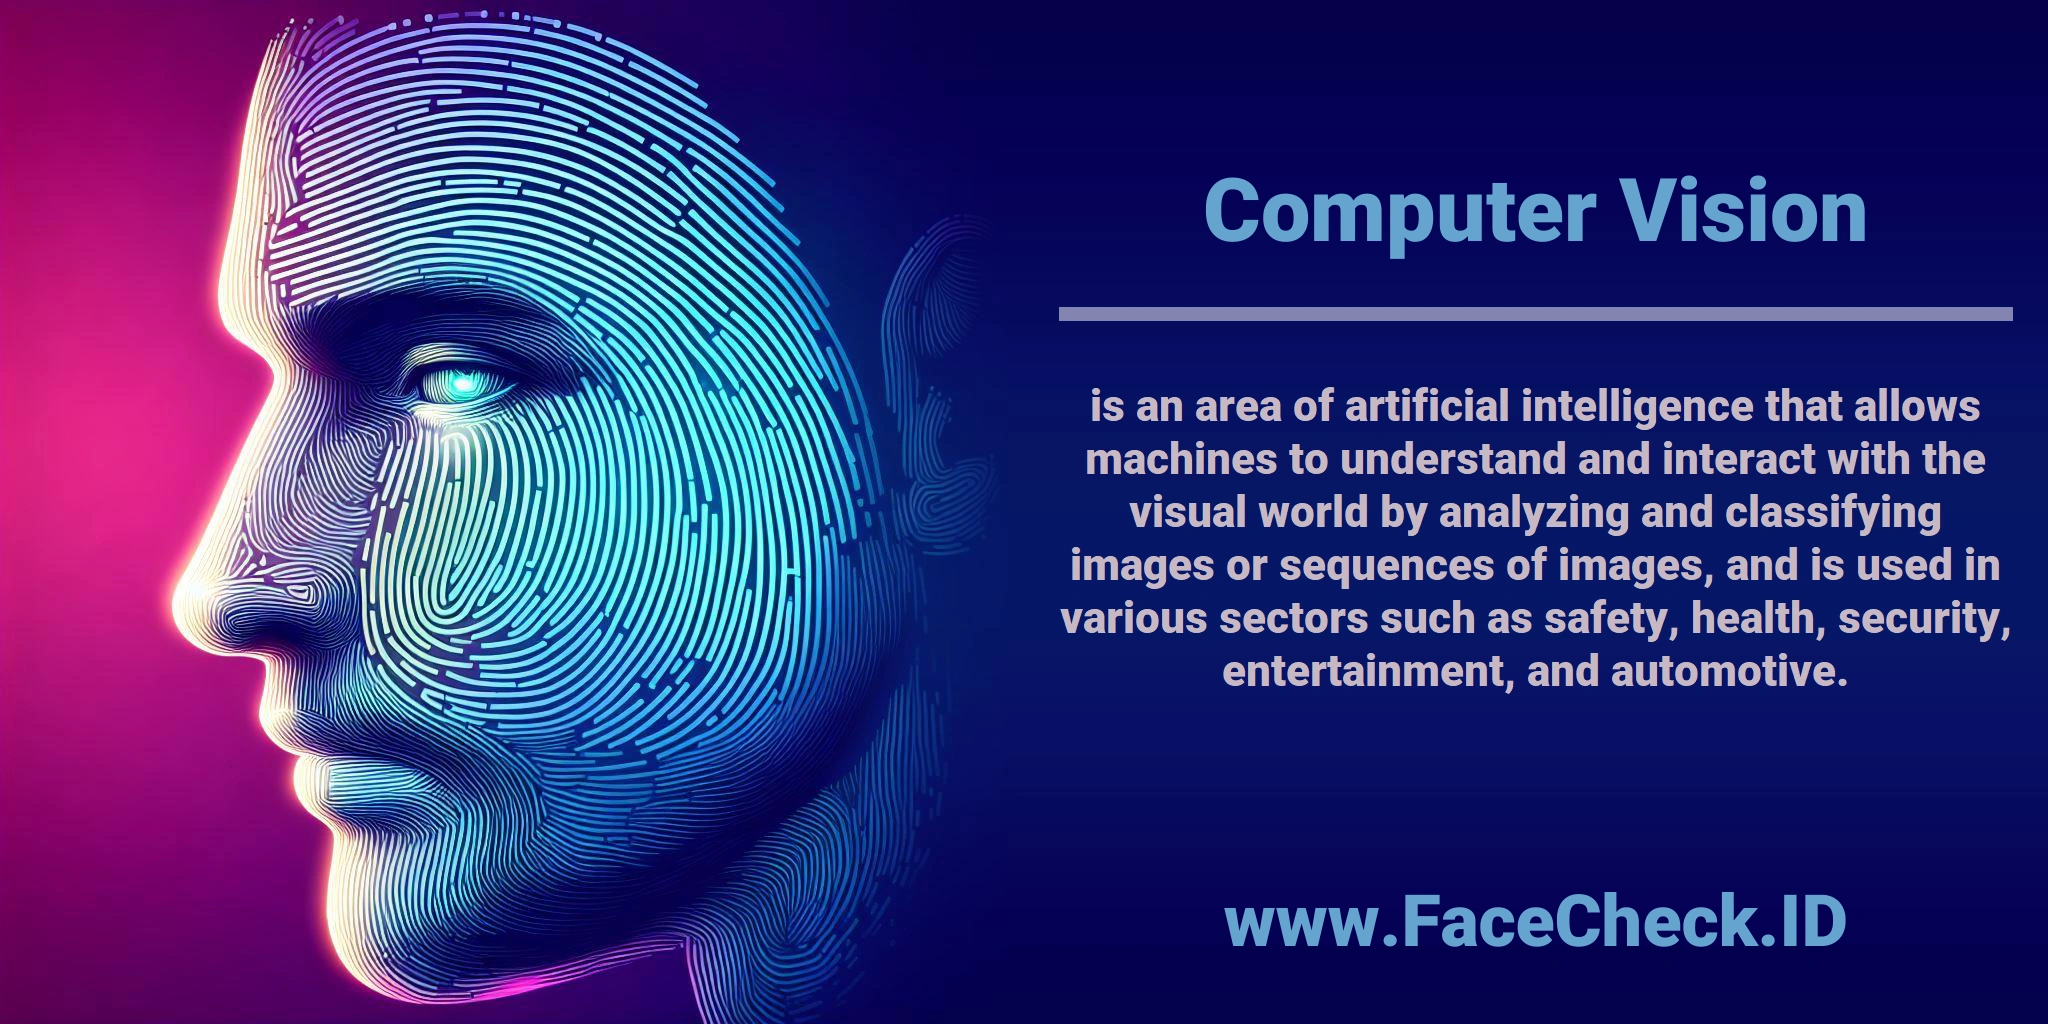 <b>Computer Vision</b> is an area of artificial intelligence that allows machines to understand and interact with the visual world by analyzing and classifying images or sequences of images, and is used in various sectors such as safety, health, security, entertainment, and automotive.